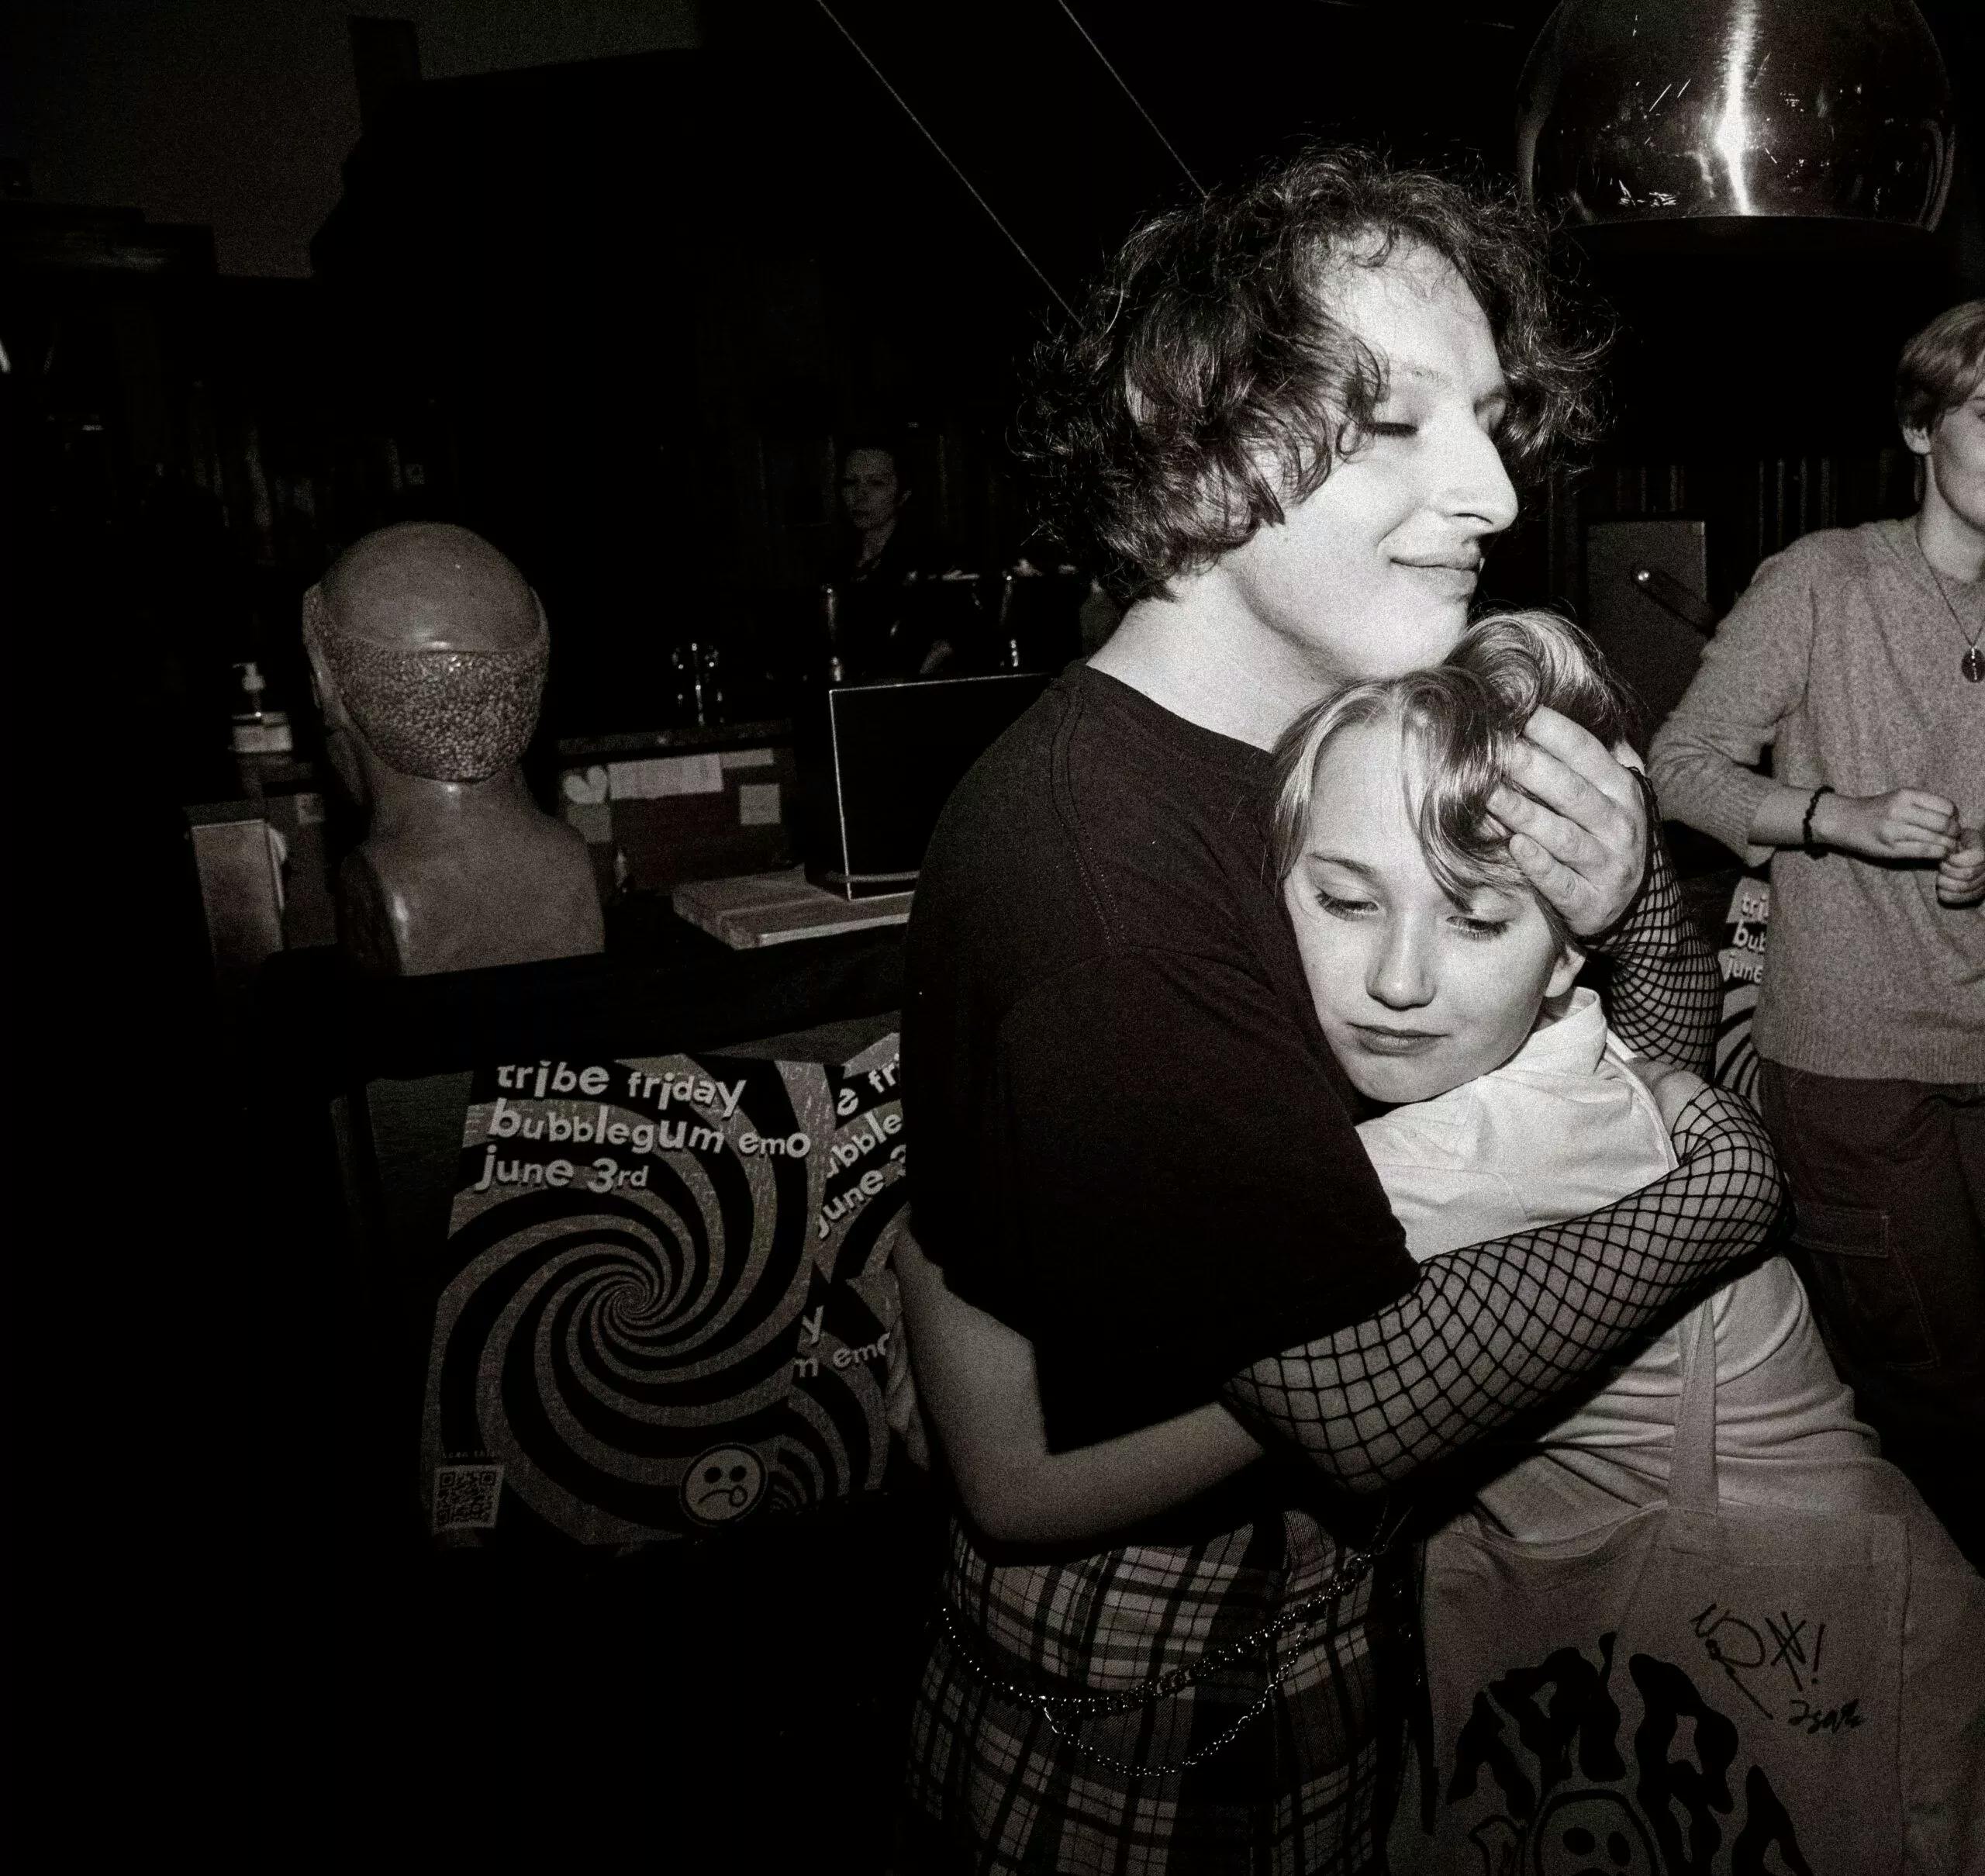 Tribe Friday at their bubblegum emo LP launch party hugging one of their superfans.